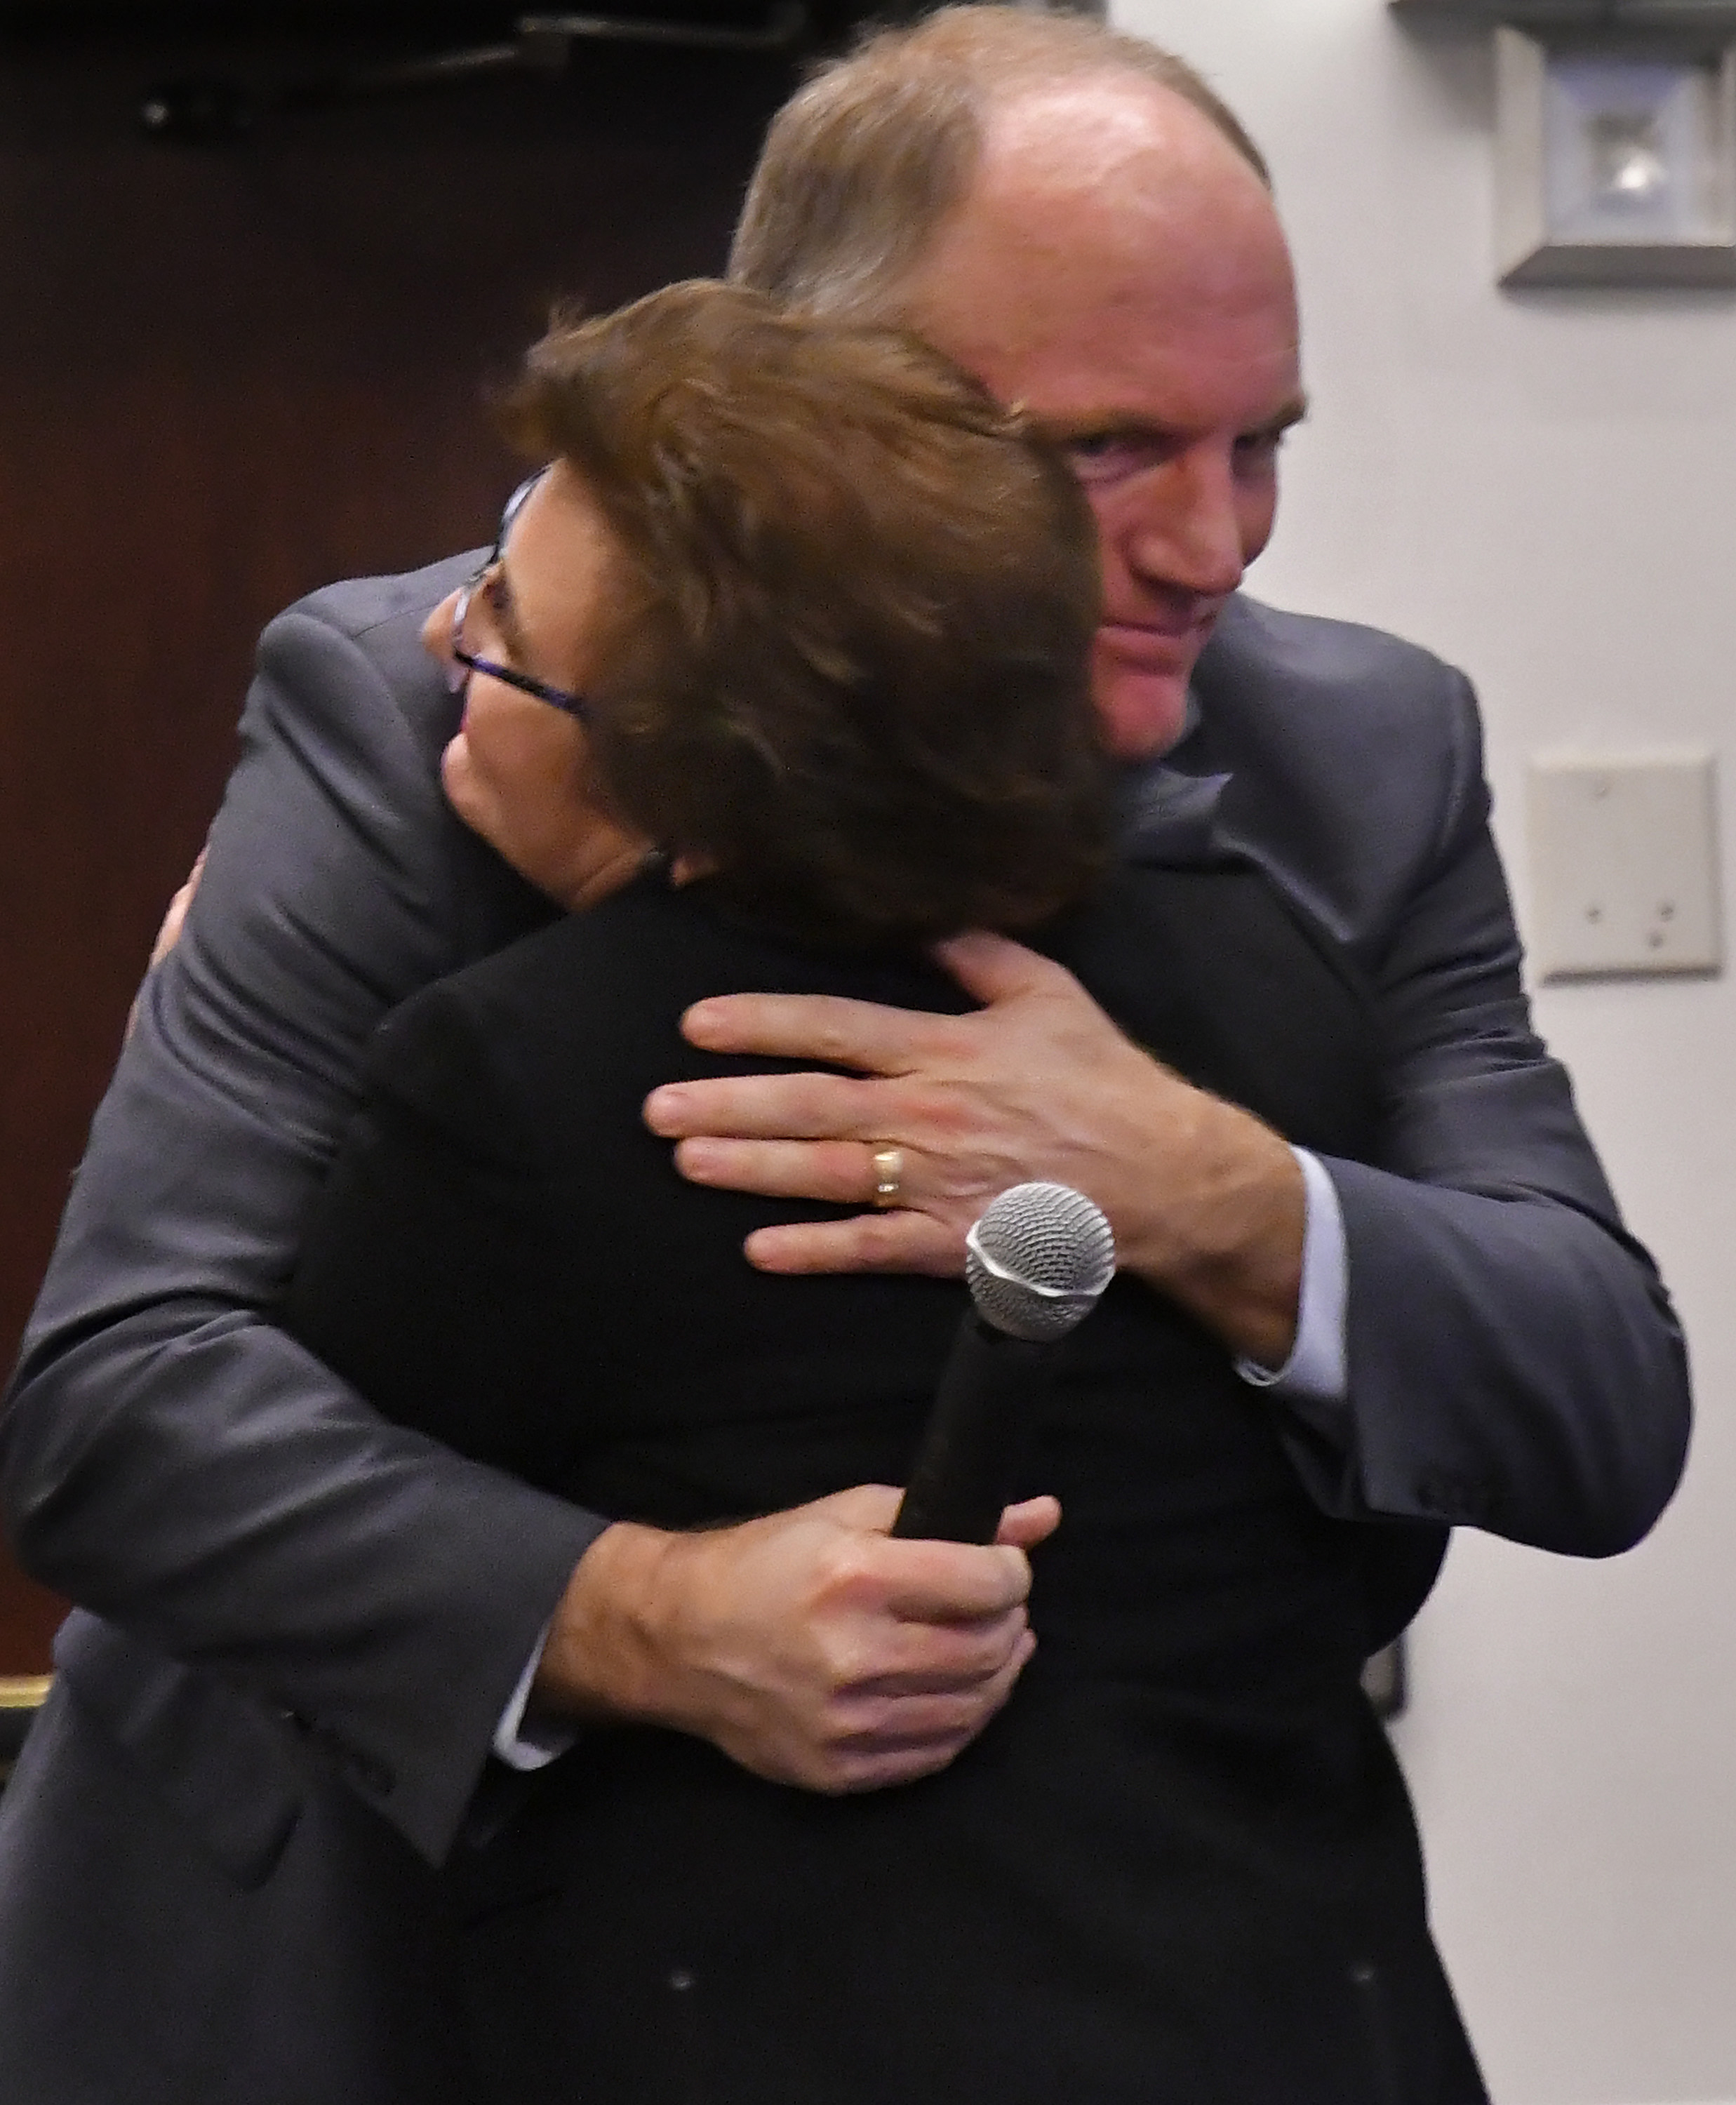 Richard McSpadden, Executive Director of AOPA Air Safety Institute, hugs Joyce Gardella, who helped fund an Air Safety Institute seminar that explores see-and-avoid techniques for pilots in the aftermath of a 2012 Virginia midair collision that claimed her husband, Paul, during a presentation in Fairfax, Virginia, Jan. 10. Photo by David Tulis.